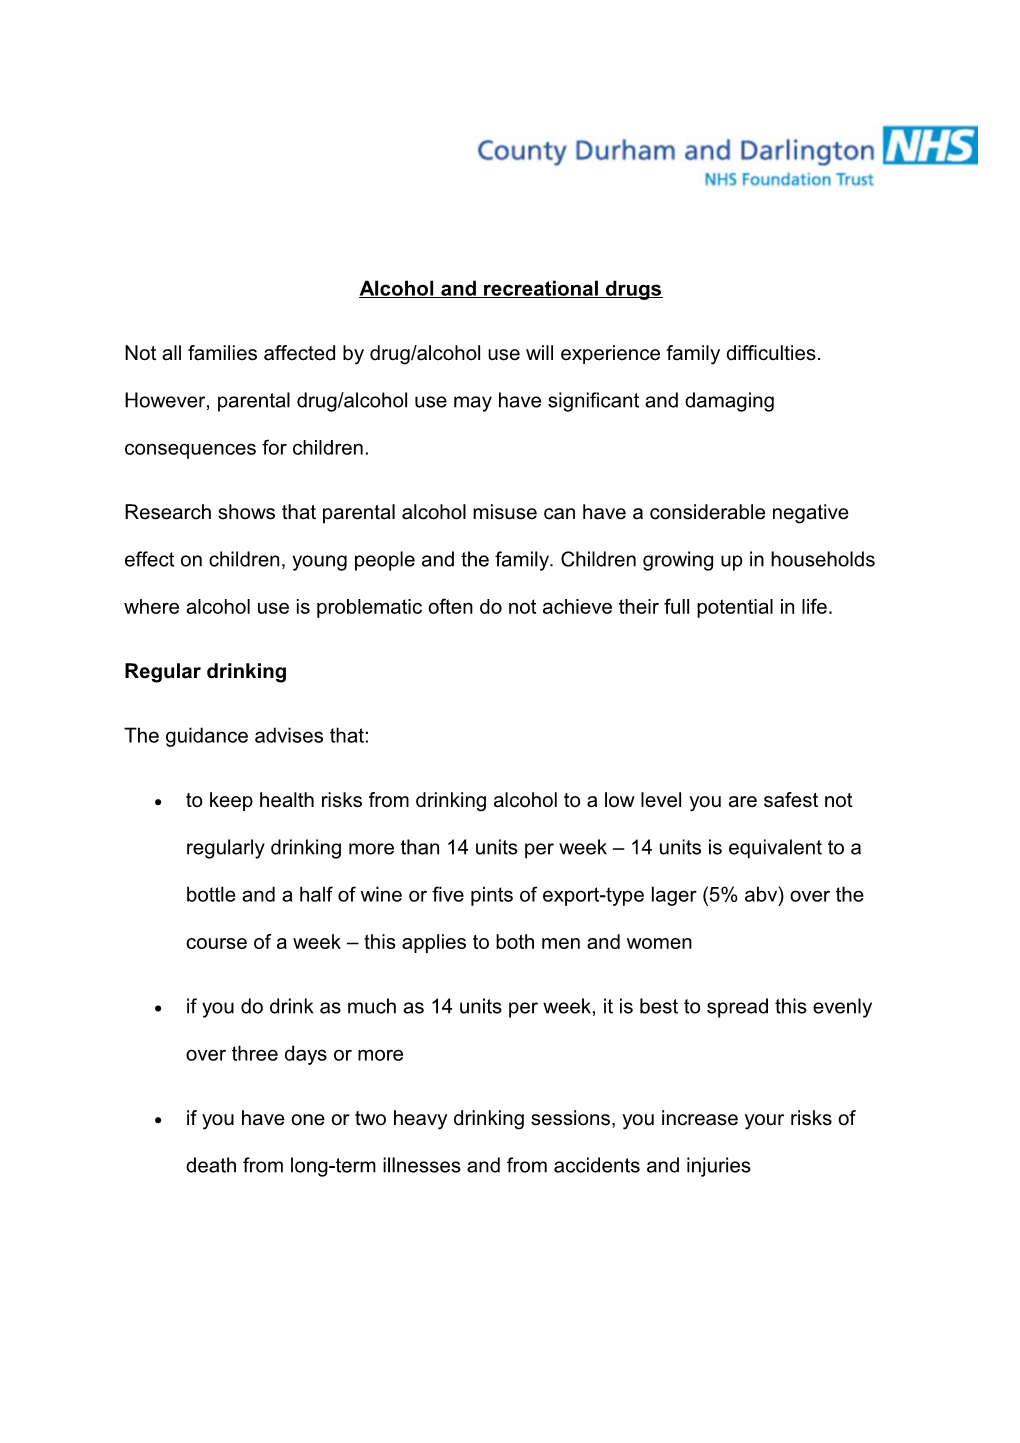 Alcohol and Recreational Drugs